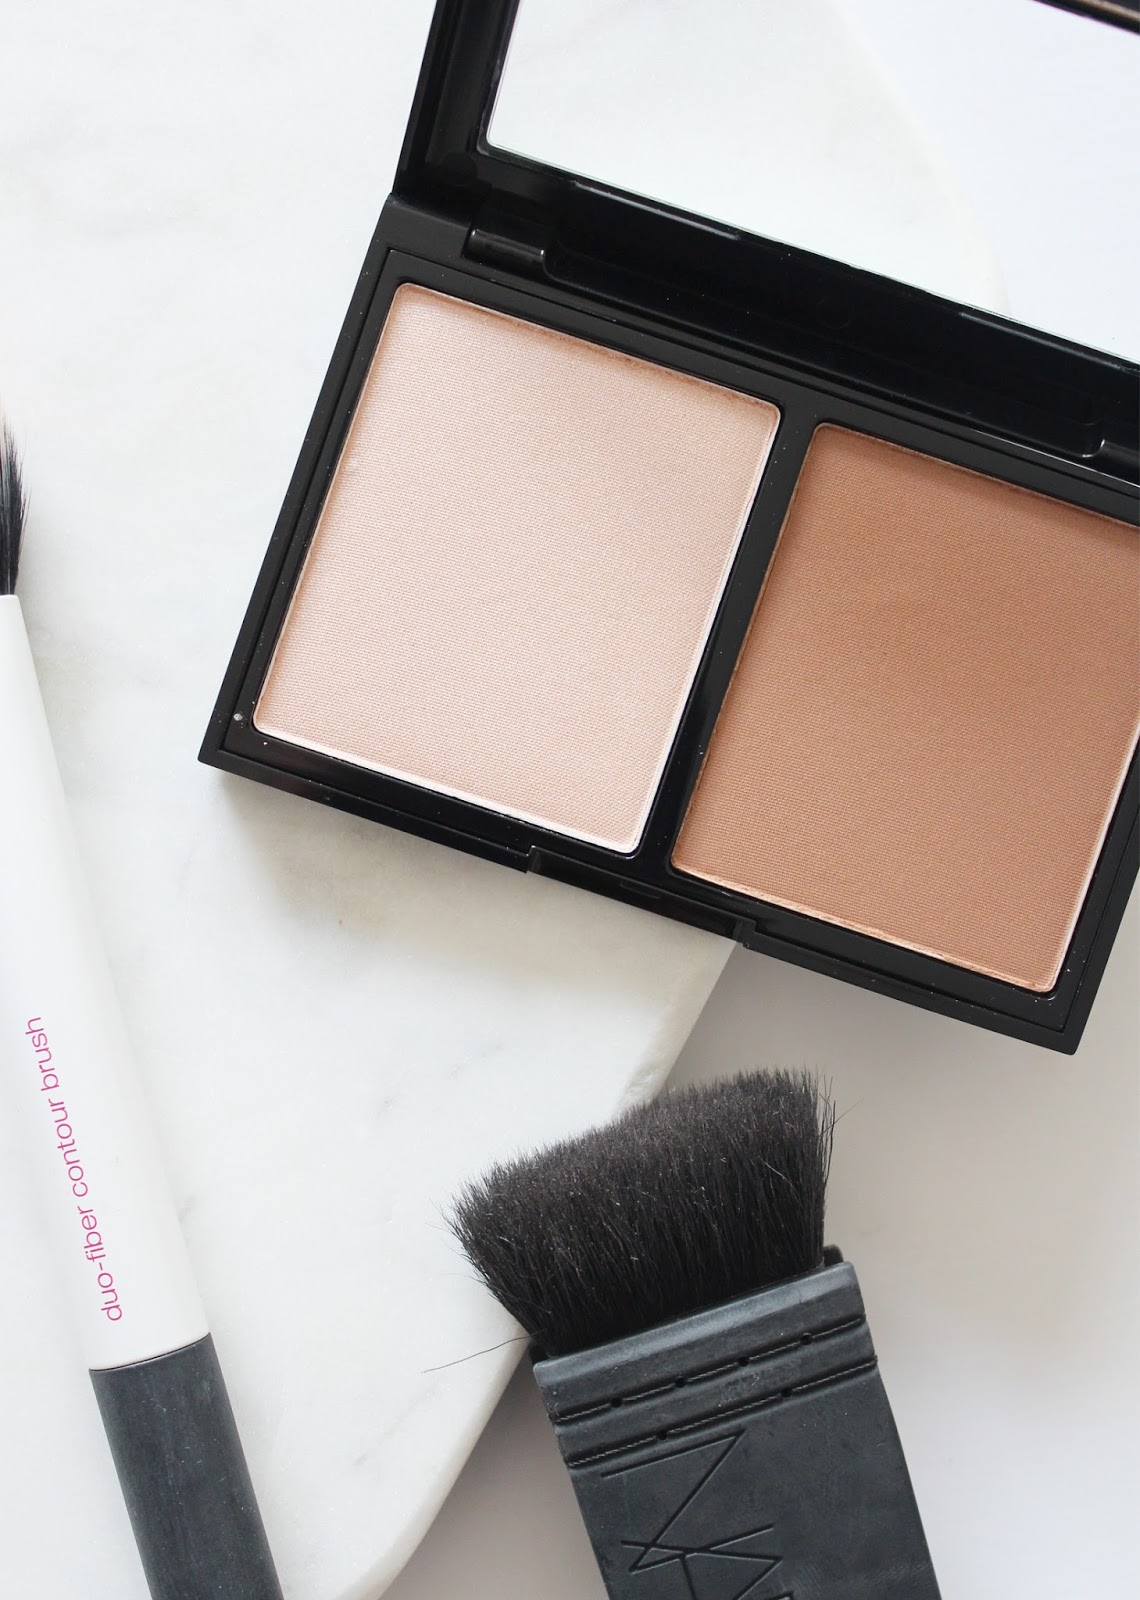 COLLECTION | Contour Kit Highlight + Sculpt Palette - Review + Swatches - CassandraMyee